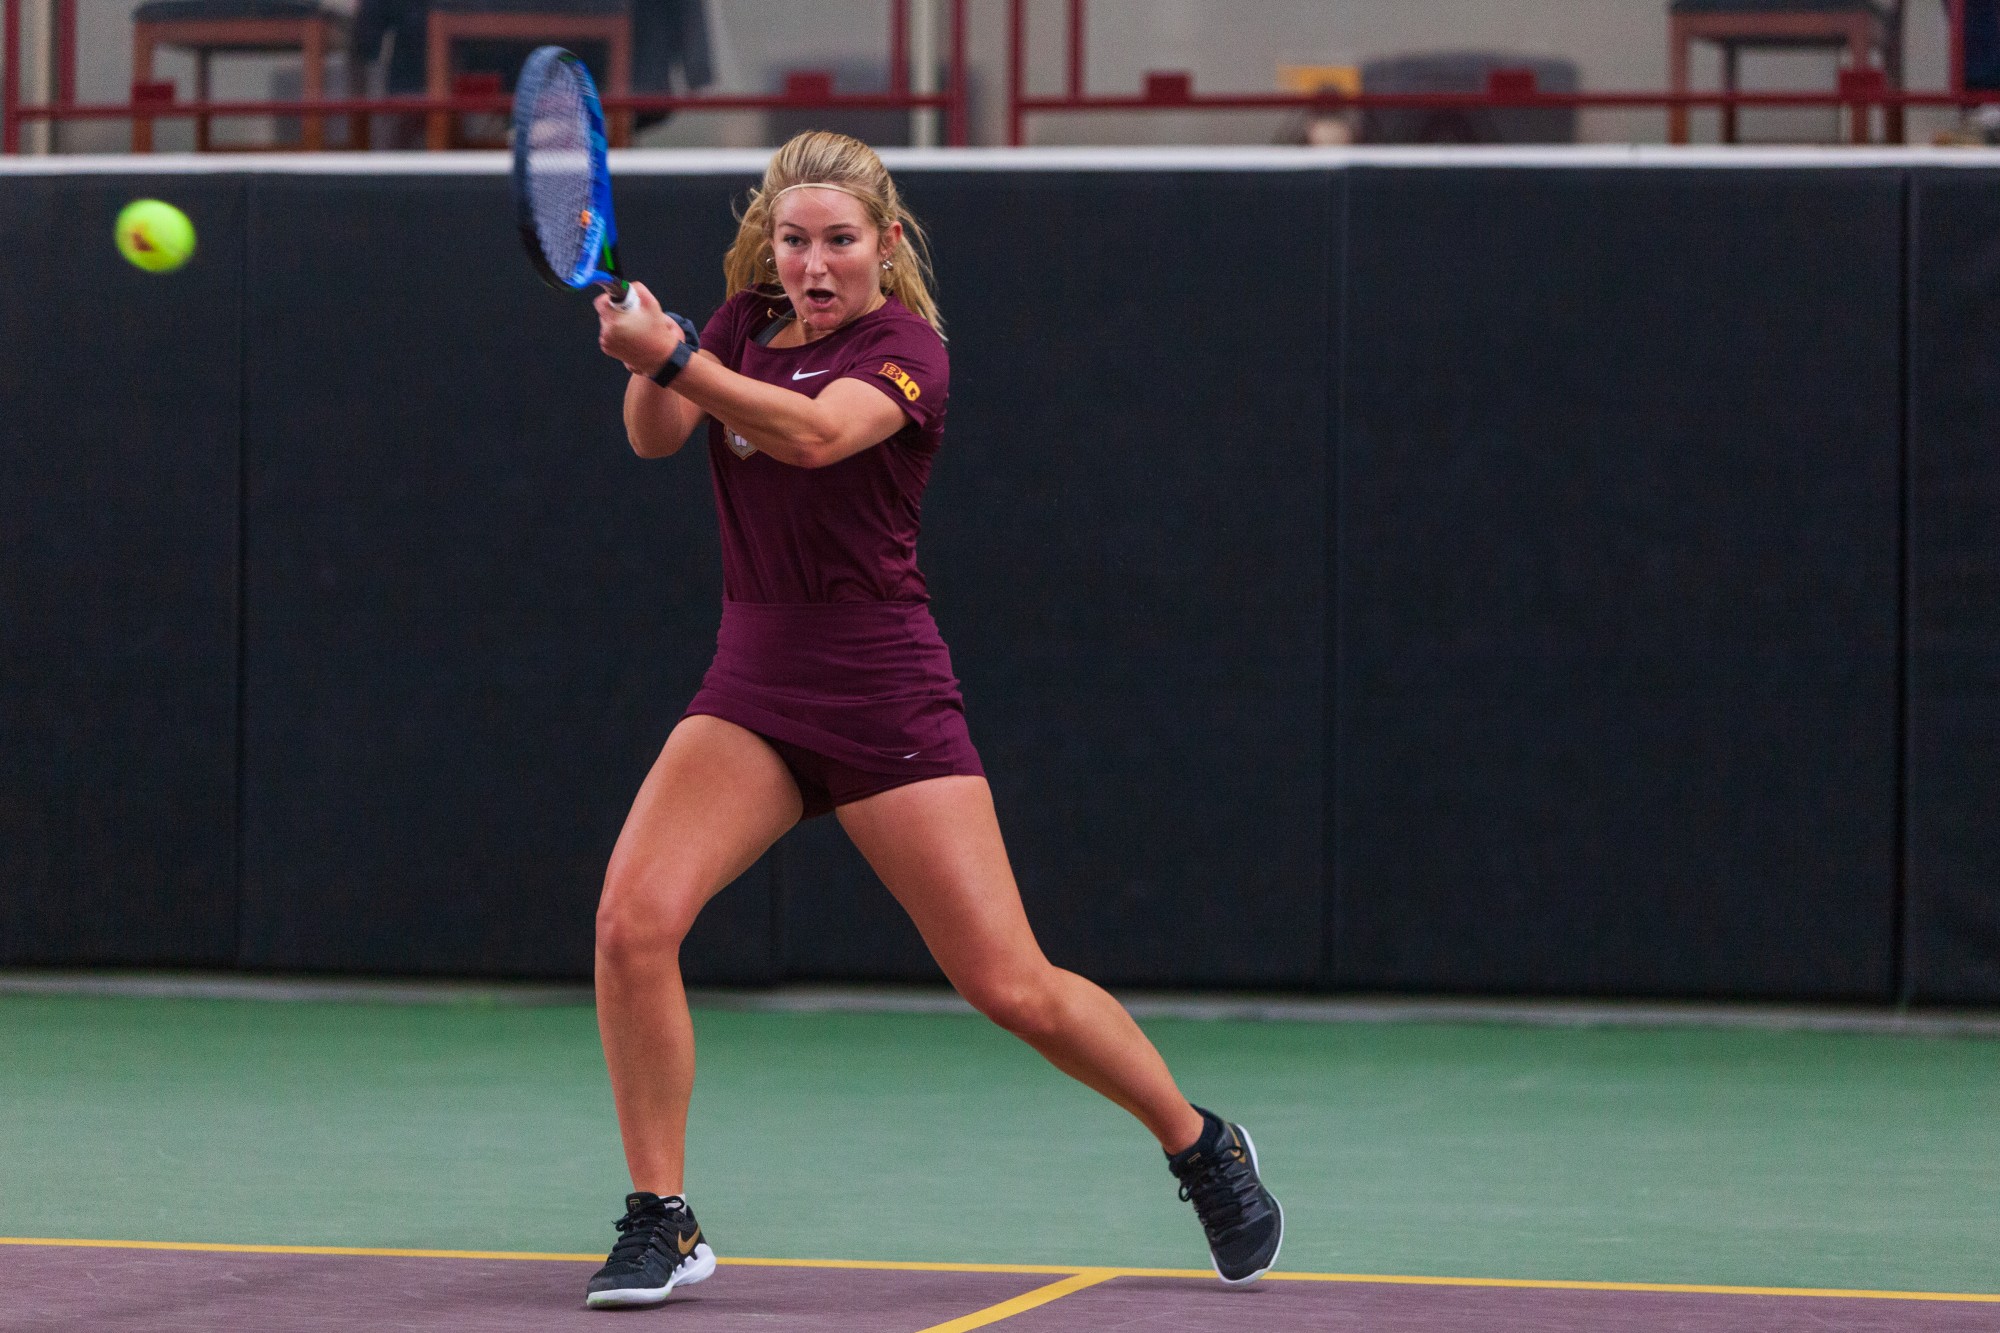 Gophers Junior River Hart returns a volley at the Baseline Tennis Center on Friday, Feb. 7.